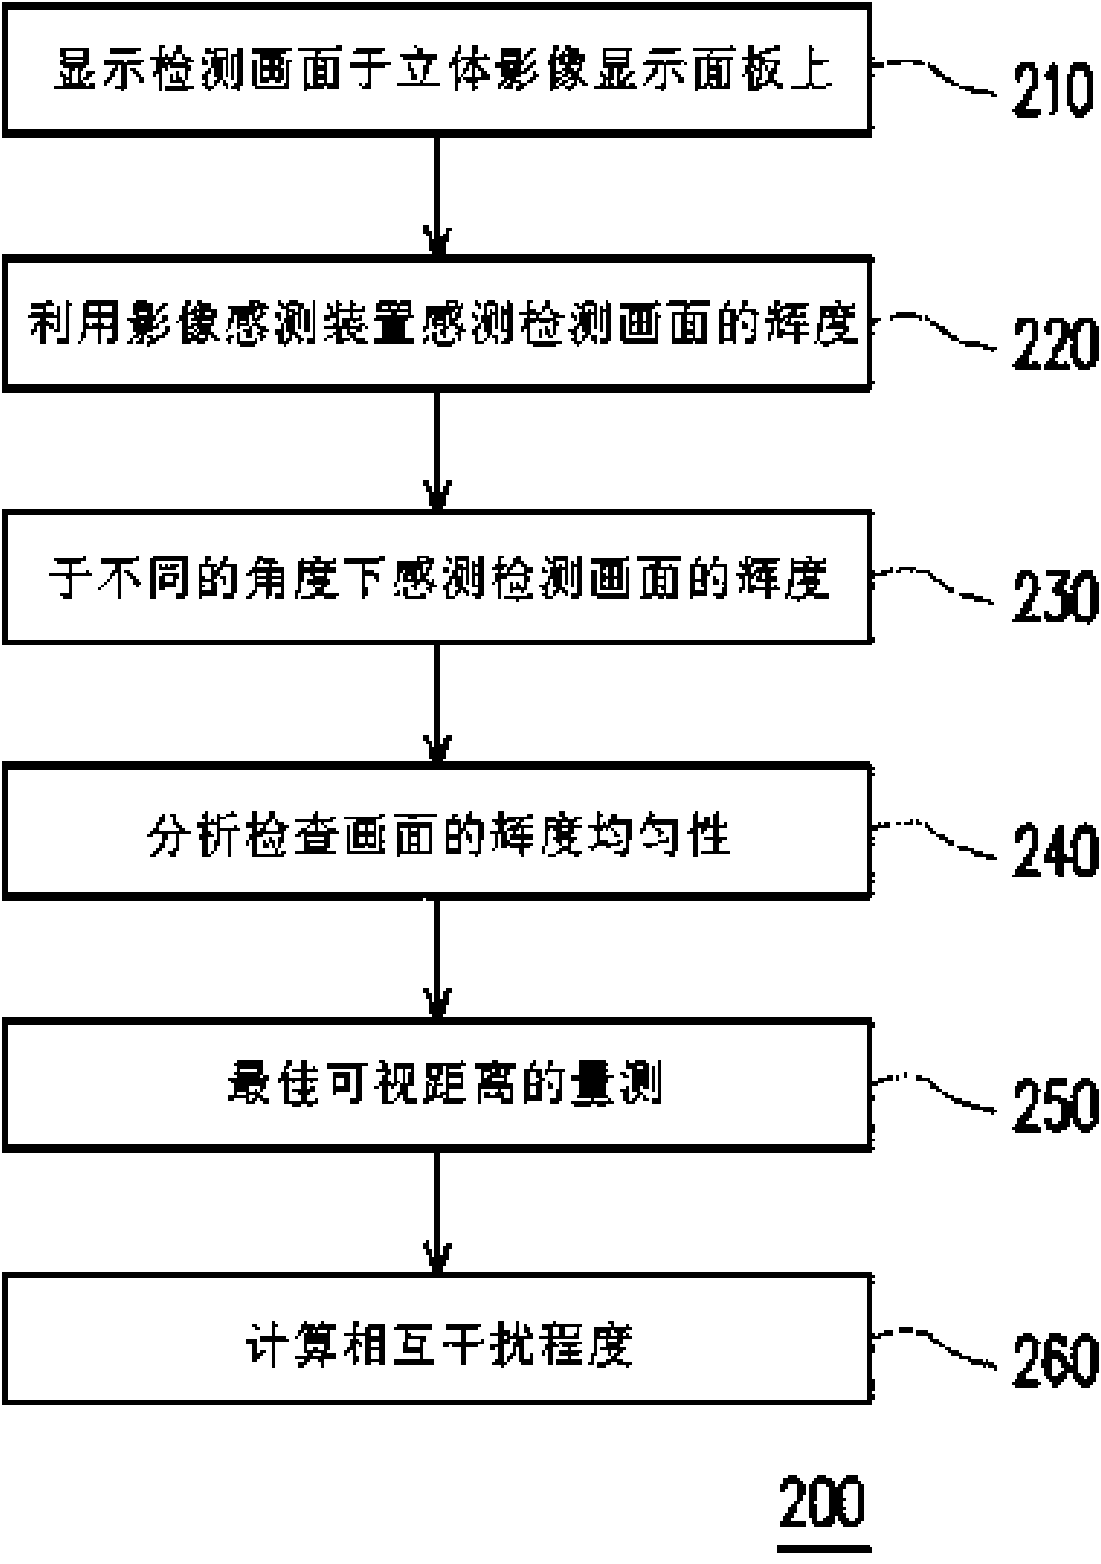 Method and system for evaluating stereoscopic image display panel